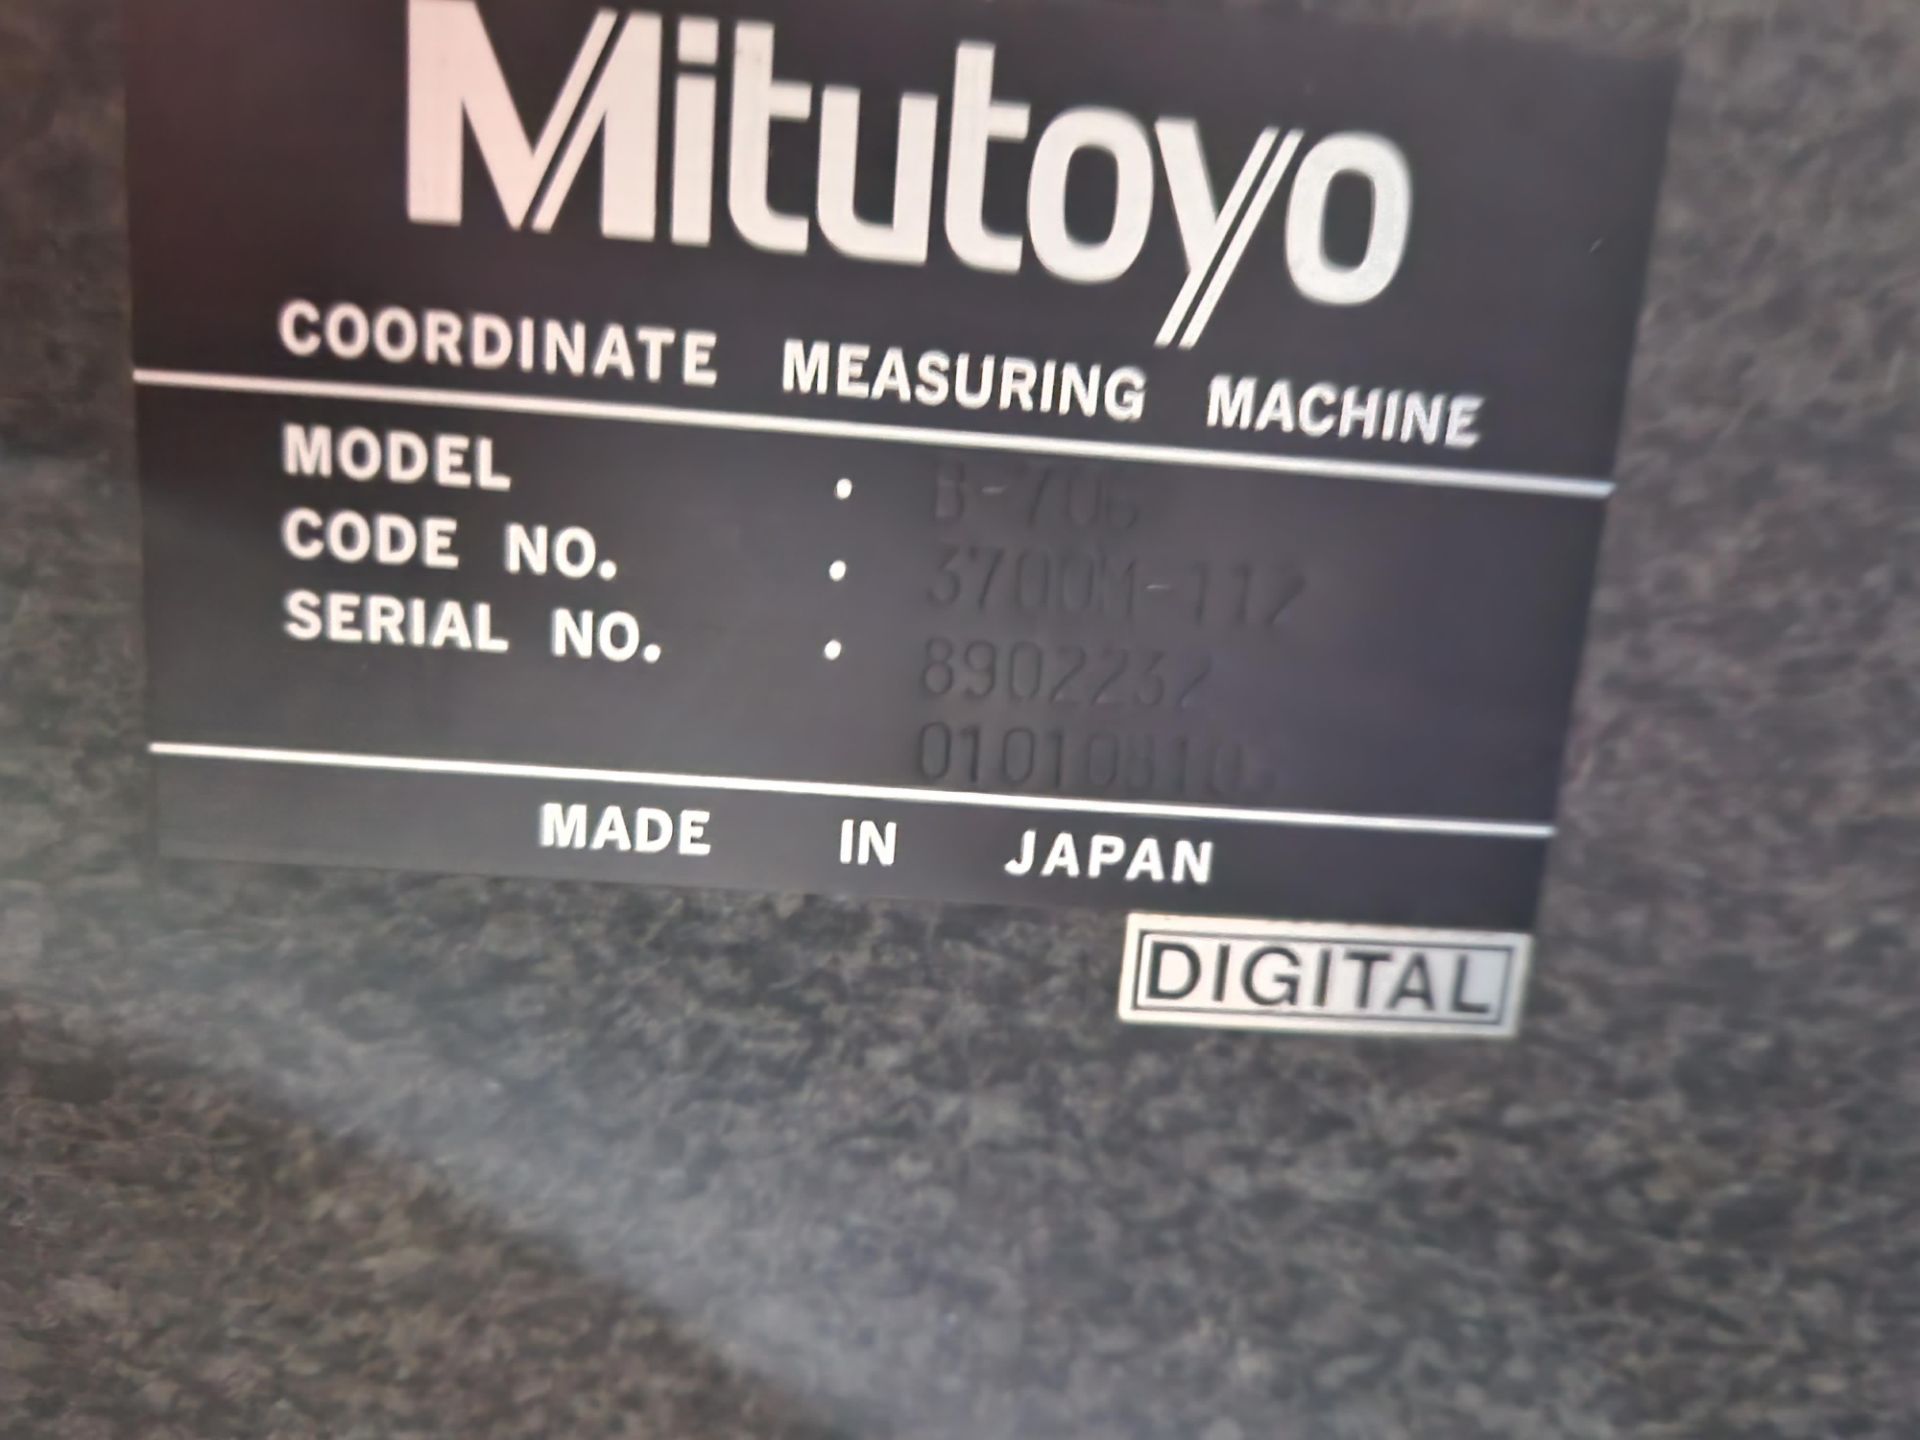 MITUTOYO B706 Co-Ordinate Measuring Machine, Serial No. 89022232, 010108106 (Known to require - Image 5 of 5